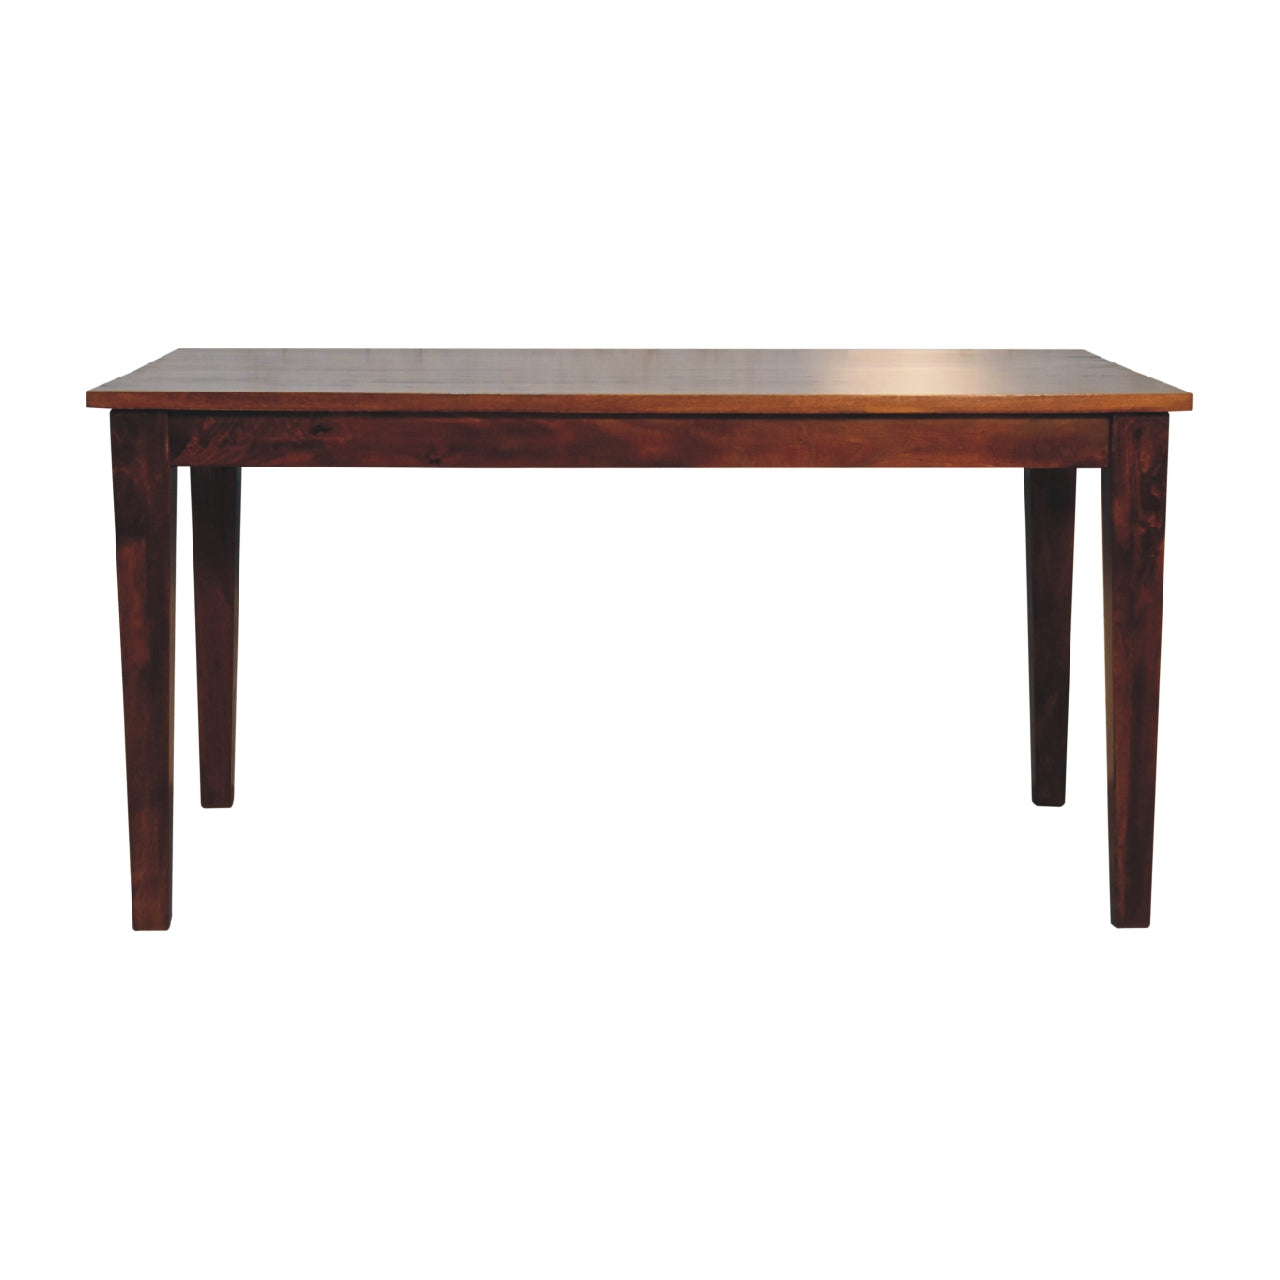 View Chestnut Dining Table information